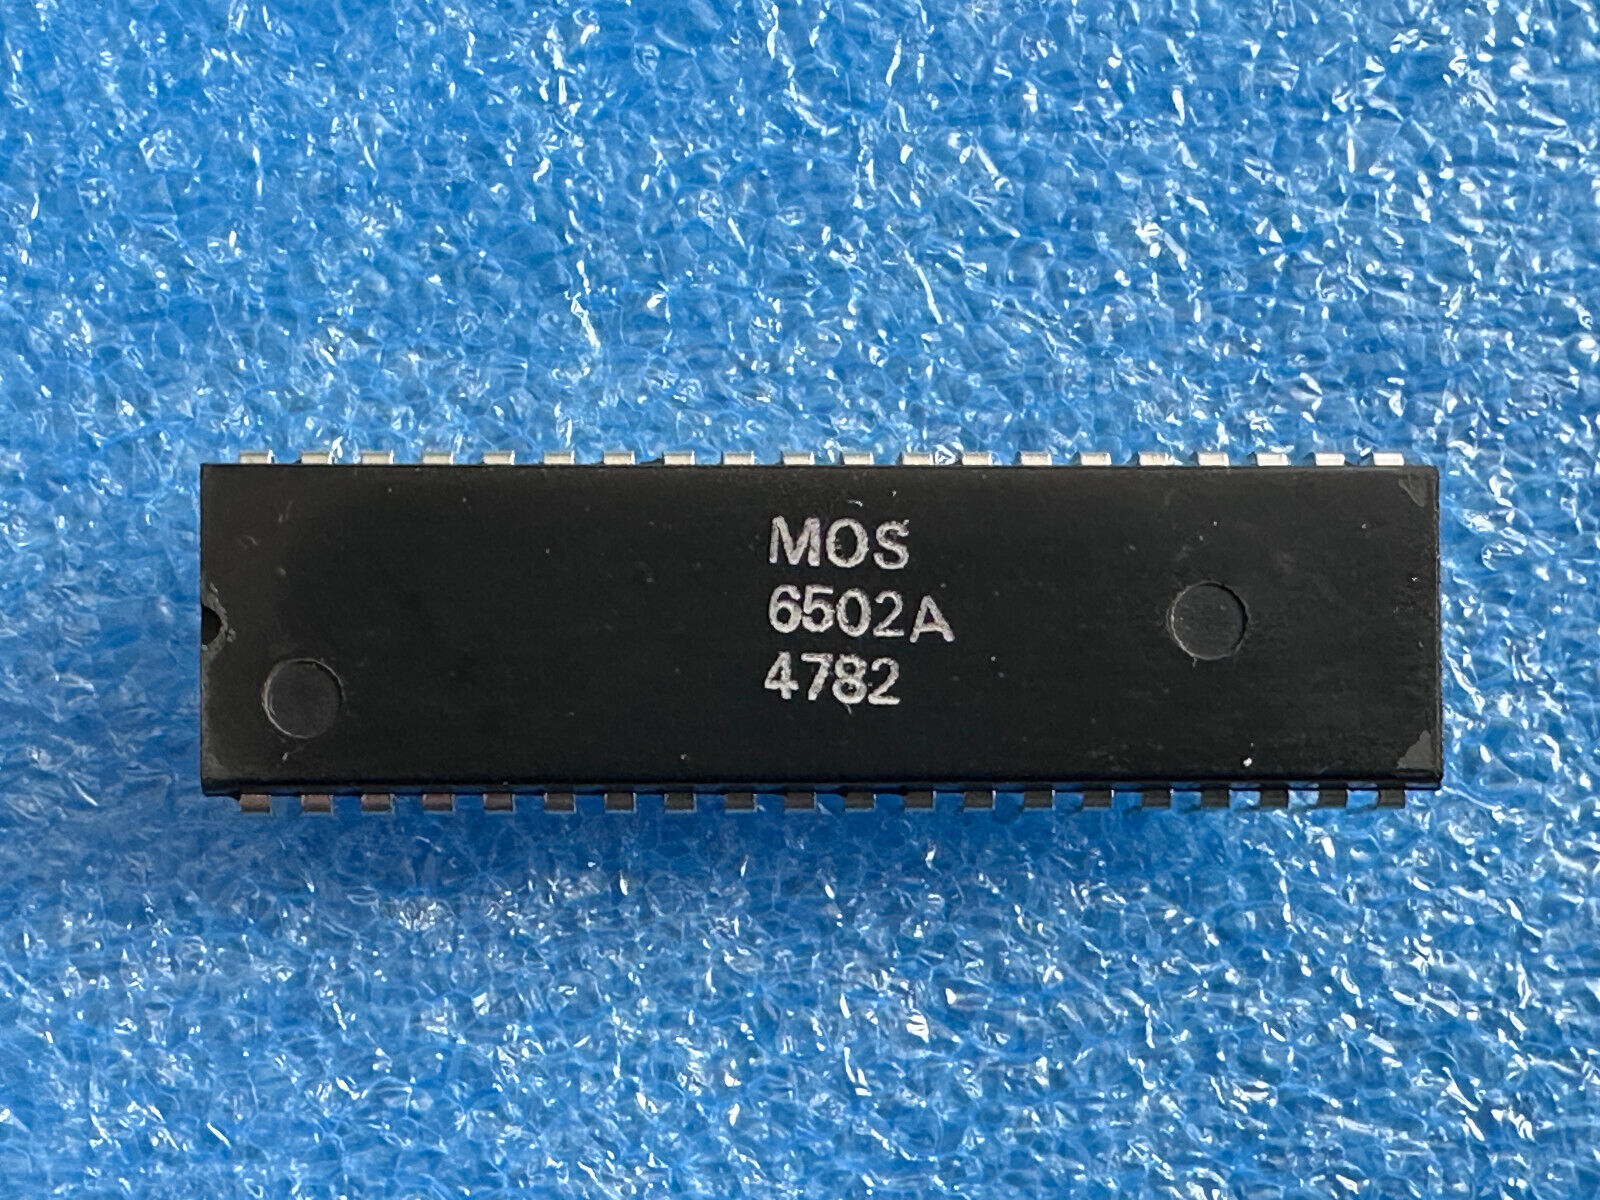 Mos 6502 (1 X) CPU for Commodore VIC-20/1541 / Apple III/Oric-1/ Acorn #47 82